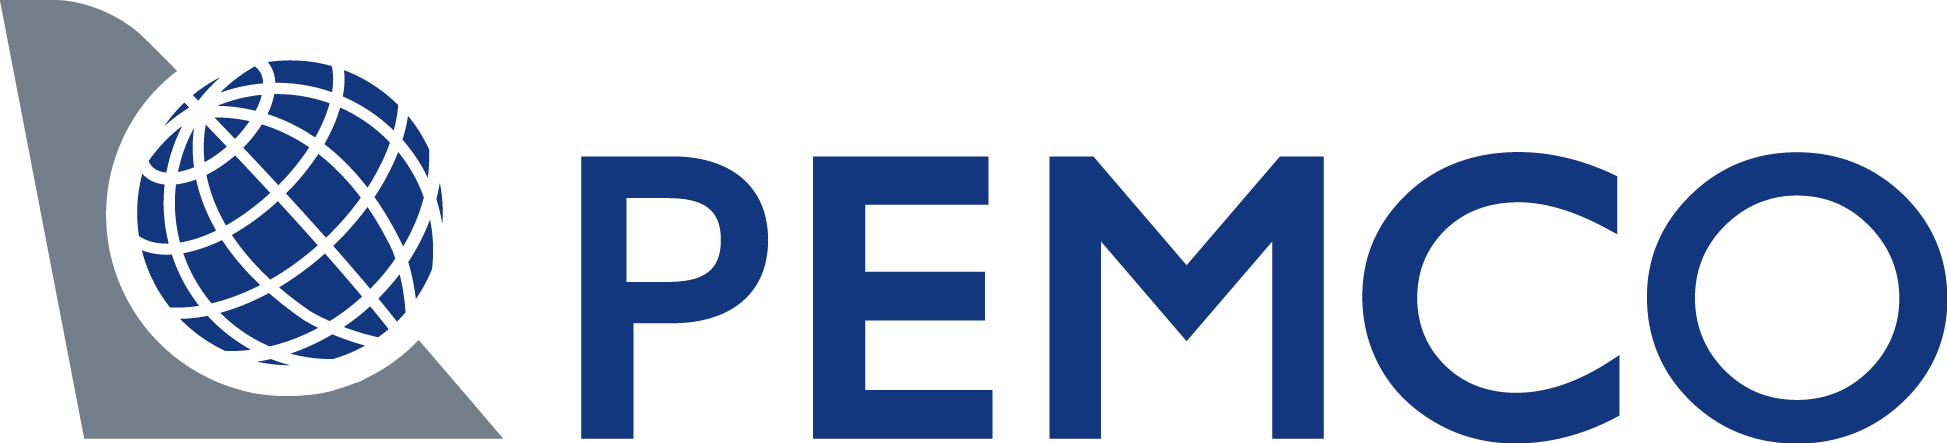 Pemco Logo - Owler Reports - Ben Ward is now General Manager at PEMCO